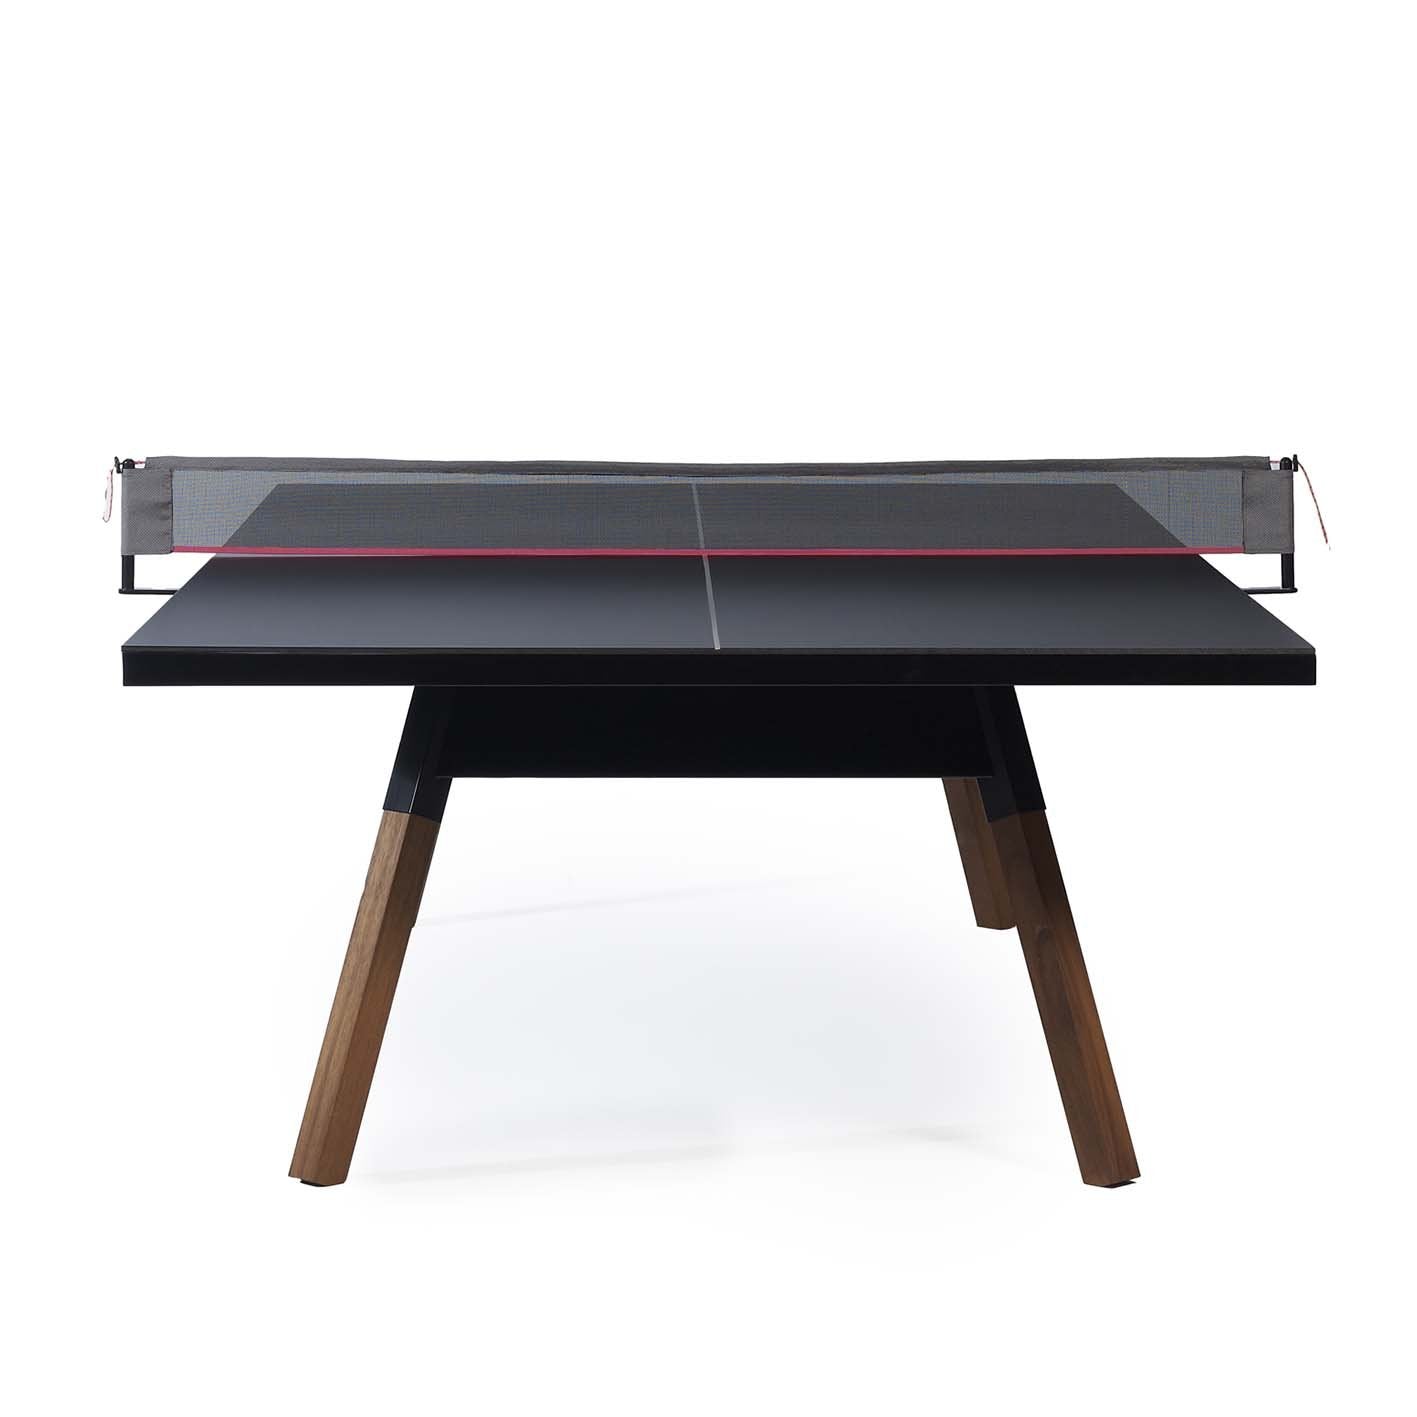 You & Me Table tennis table 180